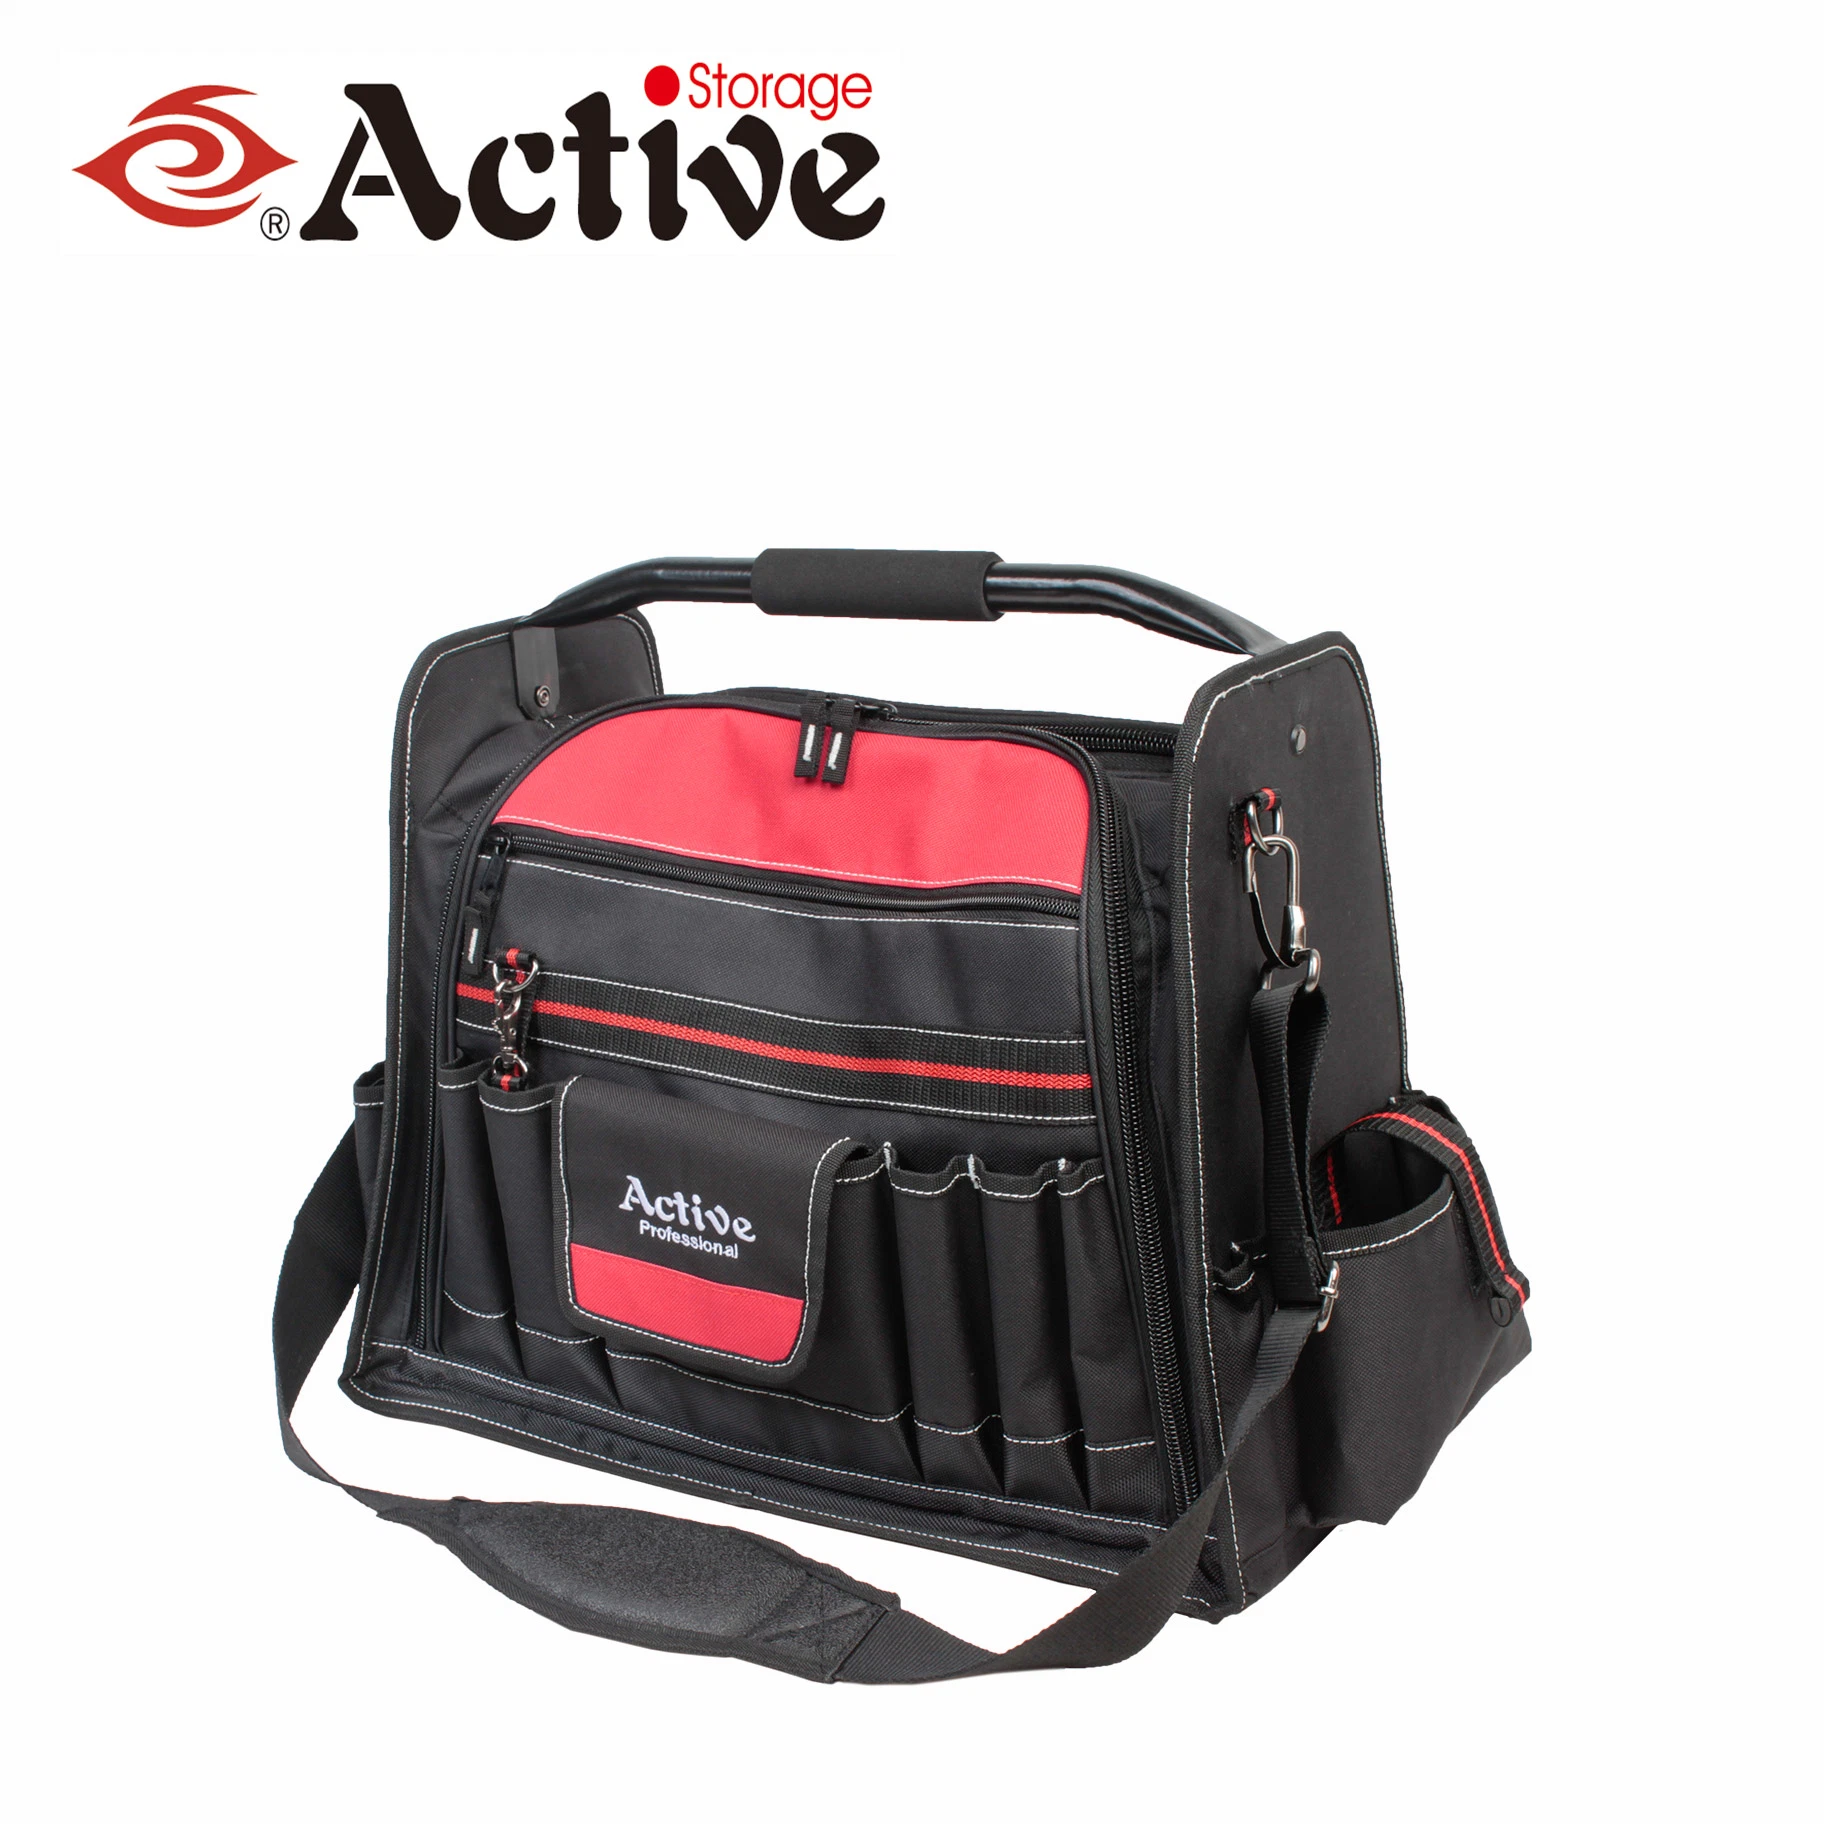 Heavy Duty Large Capacity Polyester Tool Bag with Tubular Handle and Adjustable Shoulder Strap